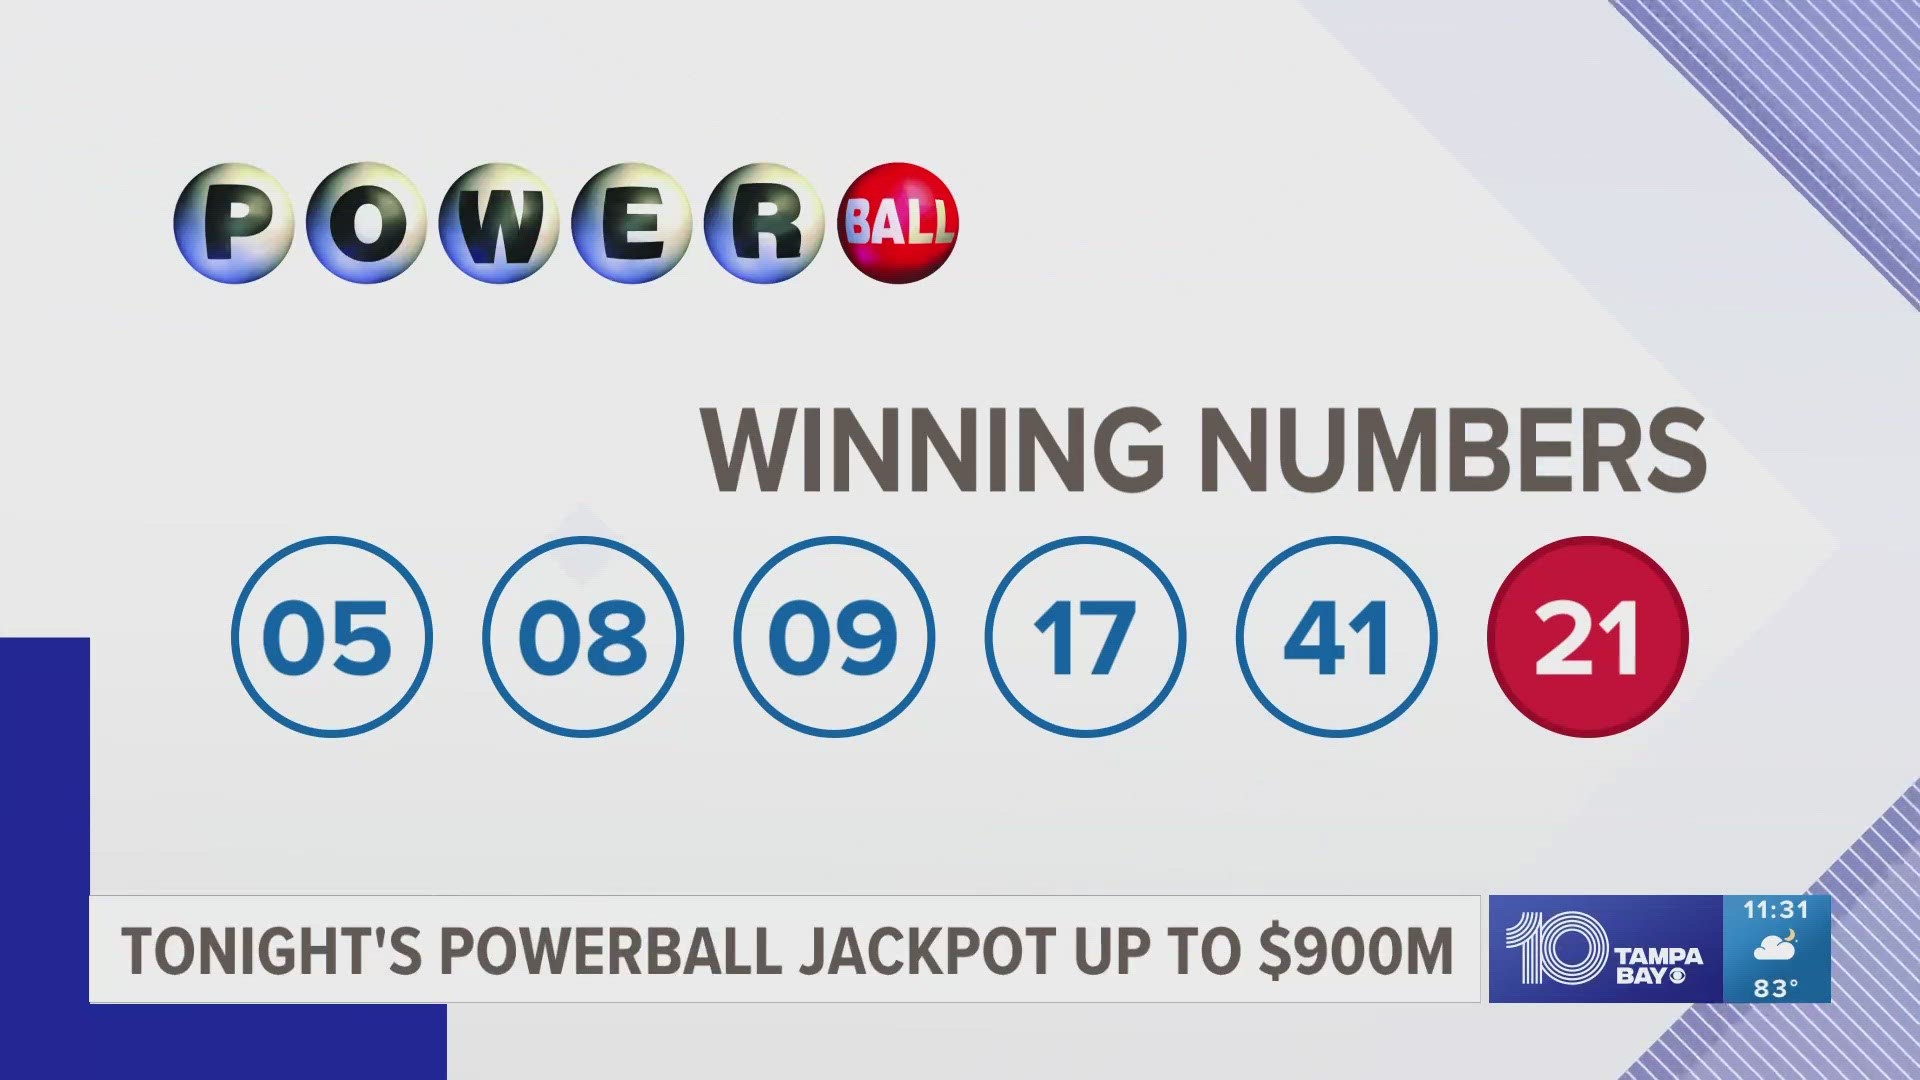 Monday's jackpot ranks as the game's third largest prize, and the seventh largest in U.S. lottery history.